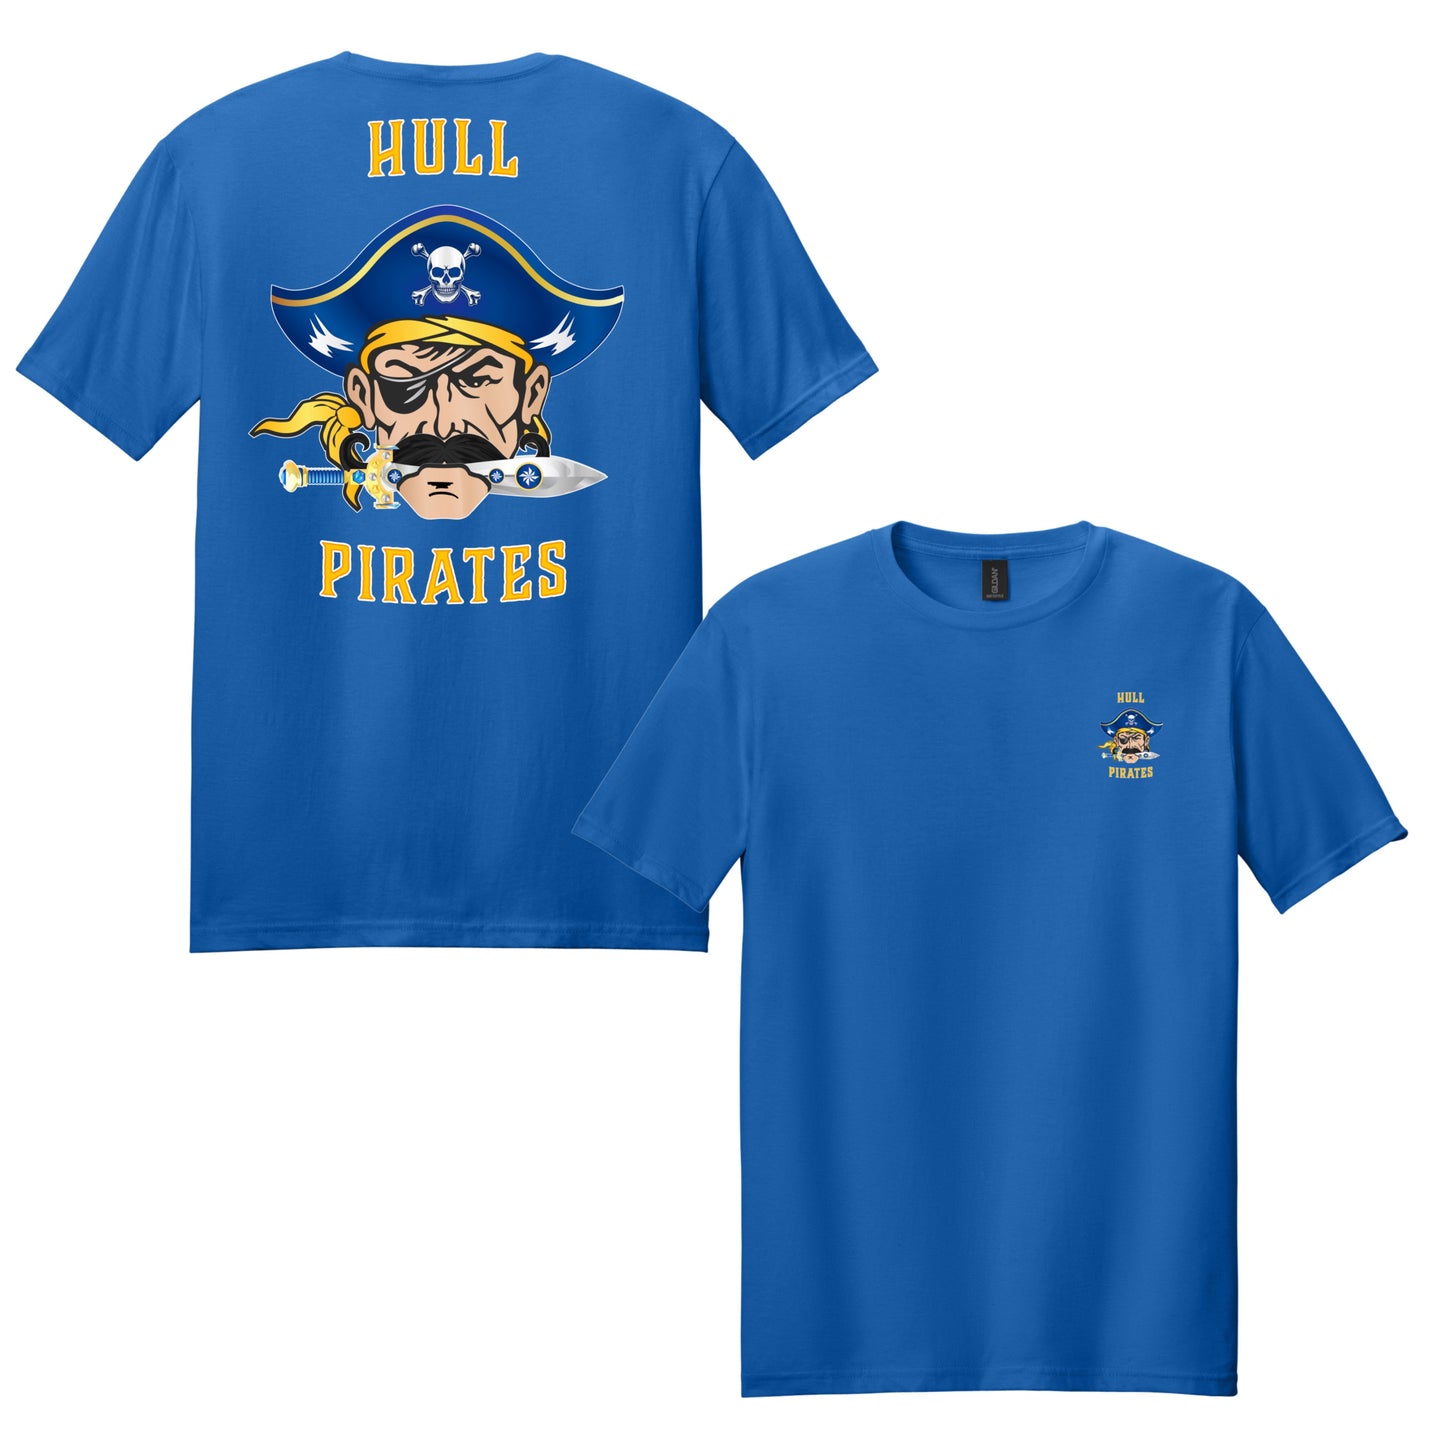 Personalize Free Hull Pirates, Adult Cotton Tee from Baby Squid Ink 